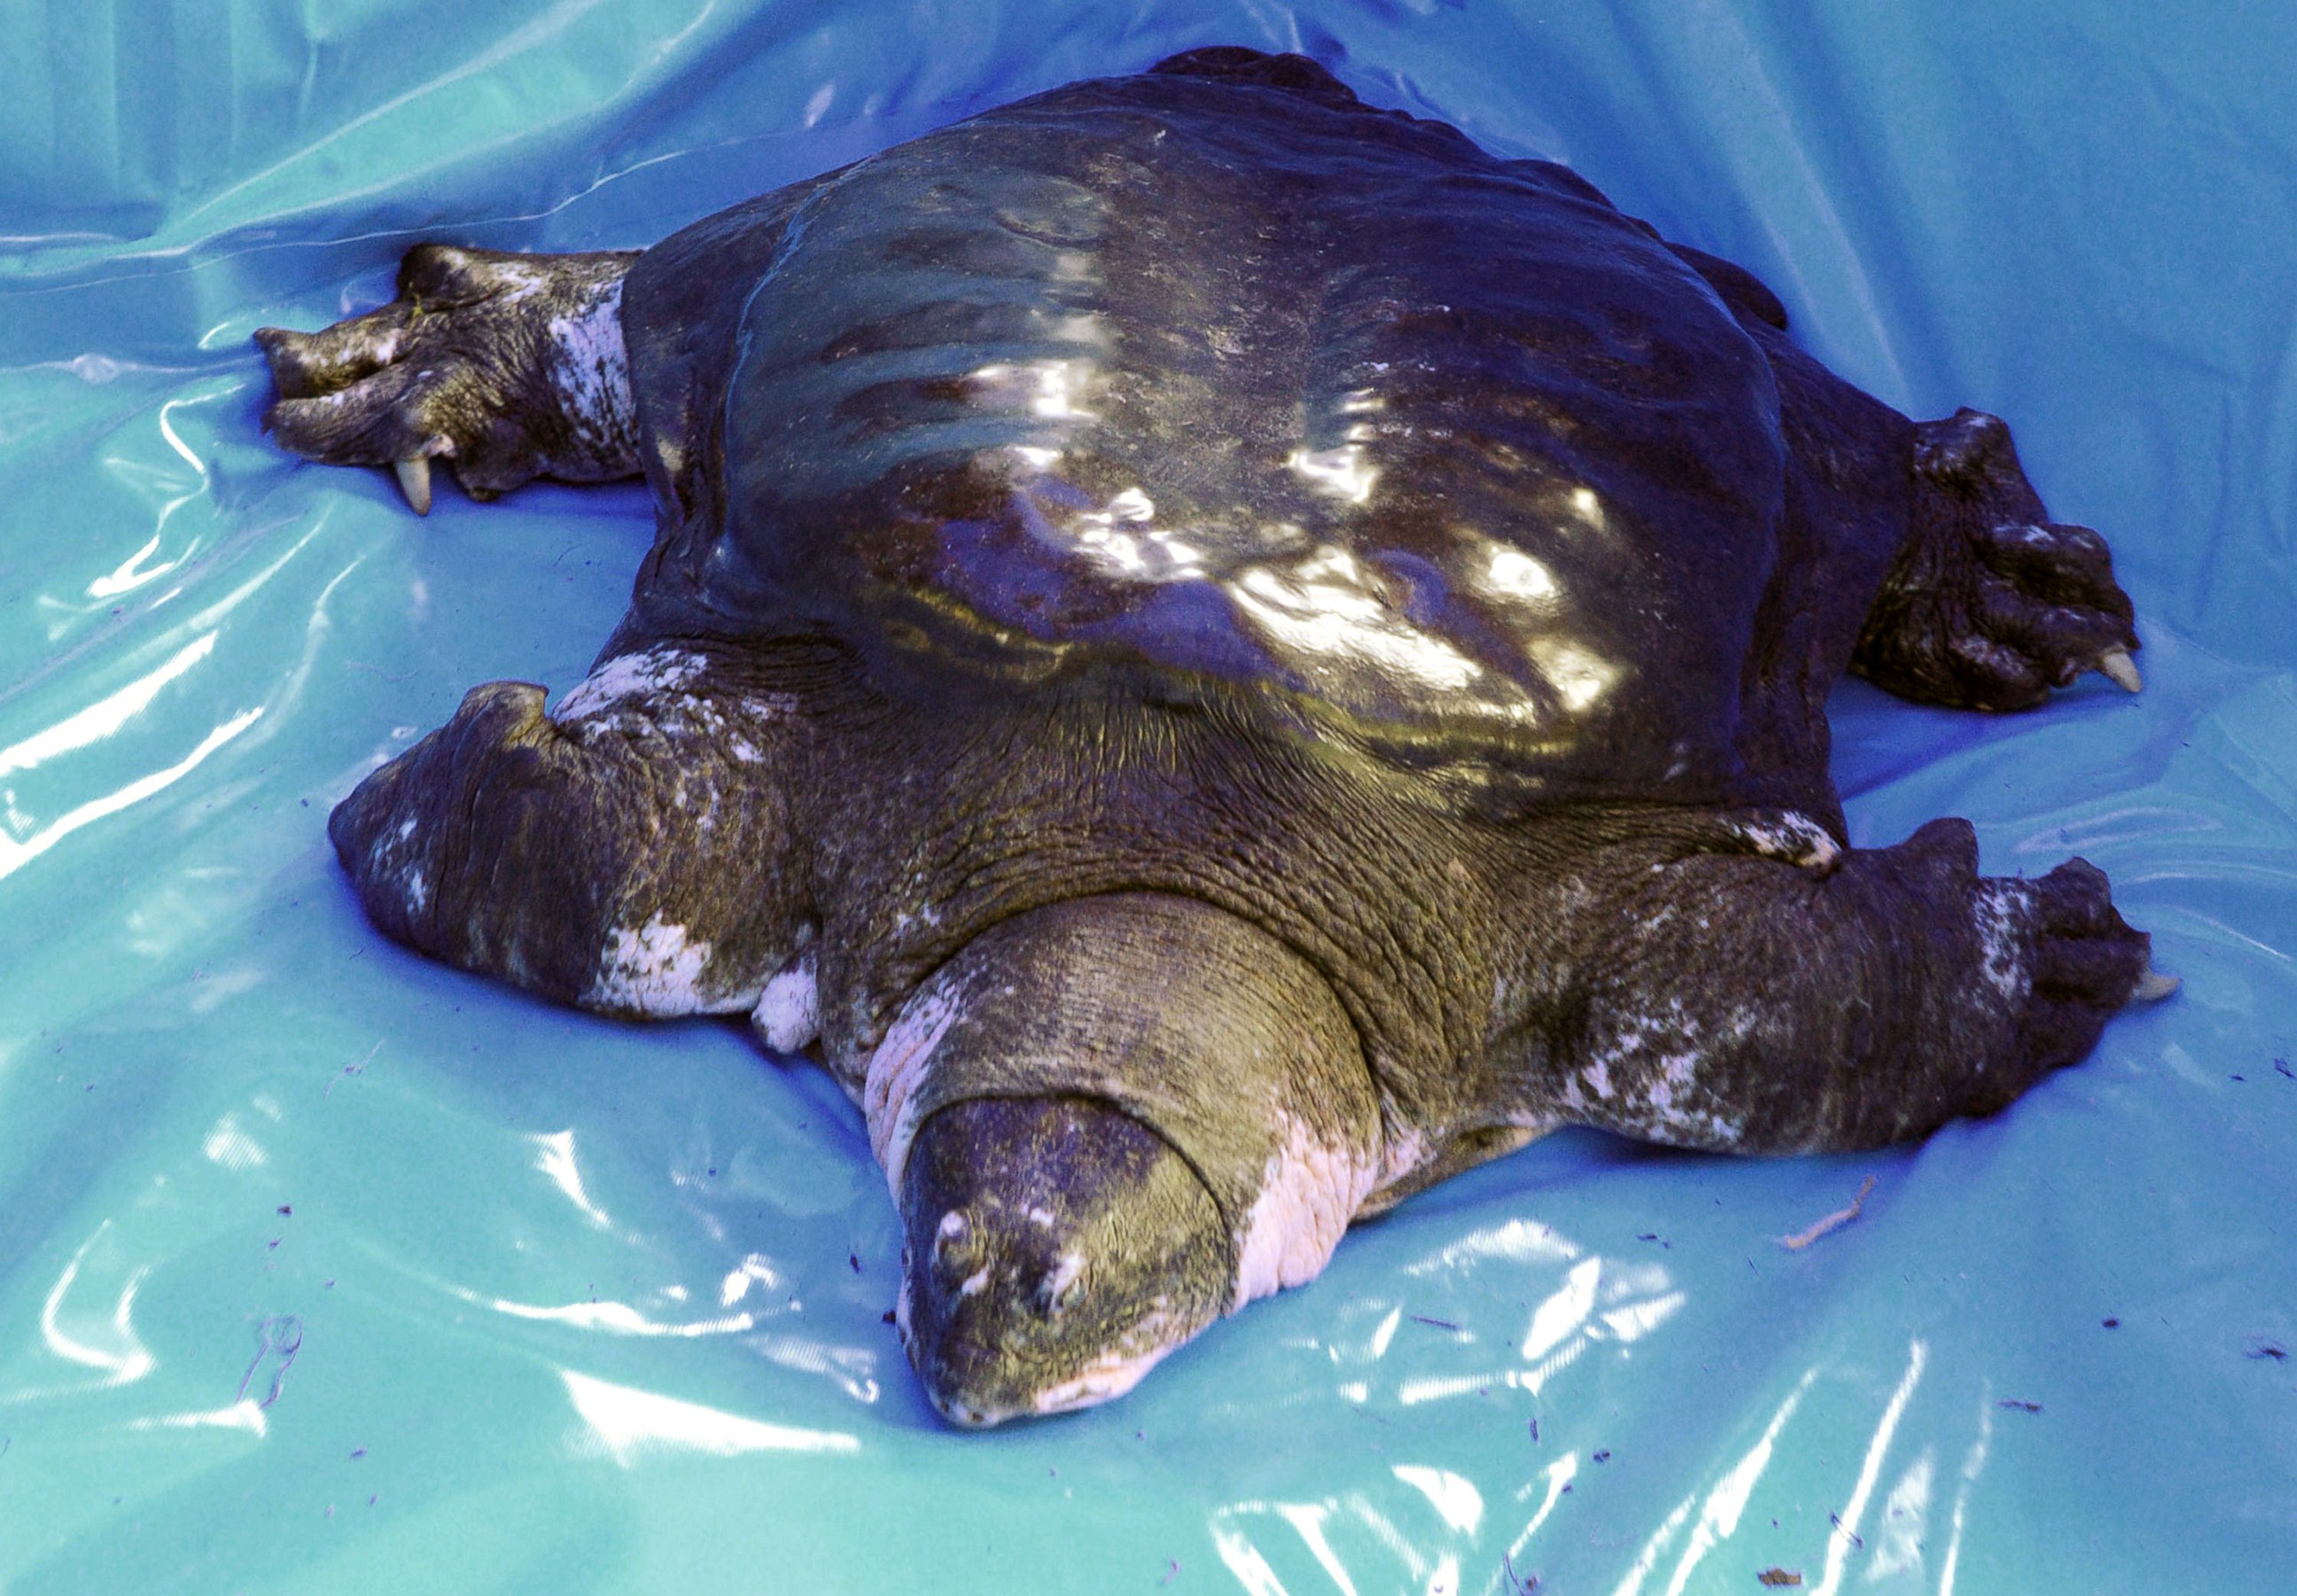 PHOTO: A male Rafetus swinhoei (also known as Yangtze giant softshell turtle) is seen after being collected sperm at Suzhou Zoo, May 6, 2015, in Suzhou, Jiangsu province of China.